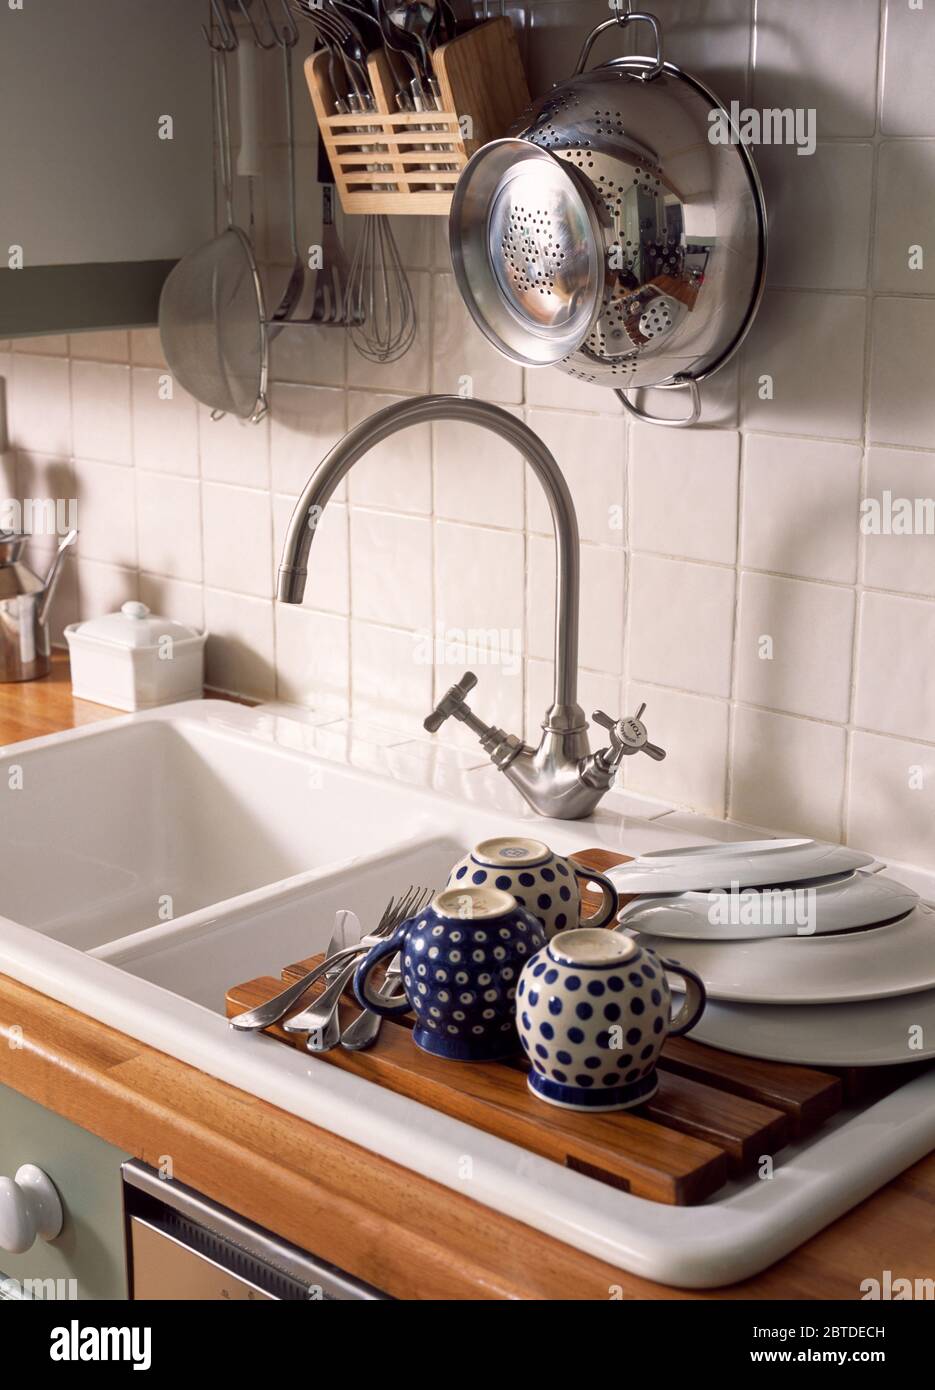 Blue+white spotted Polish cups beside sink with chrome tap Stock Photo